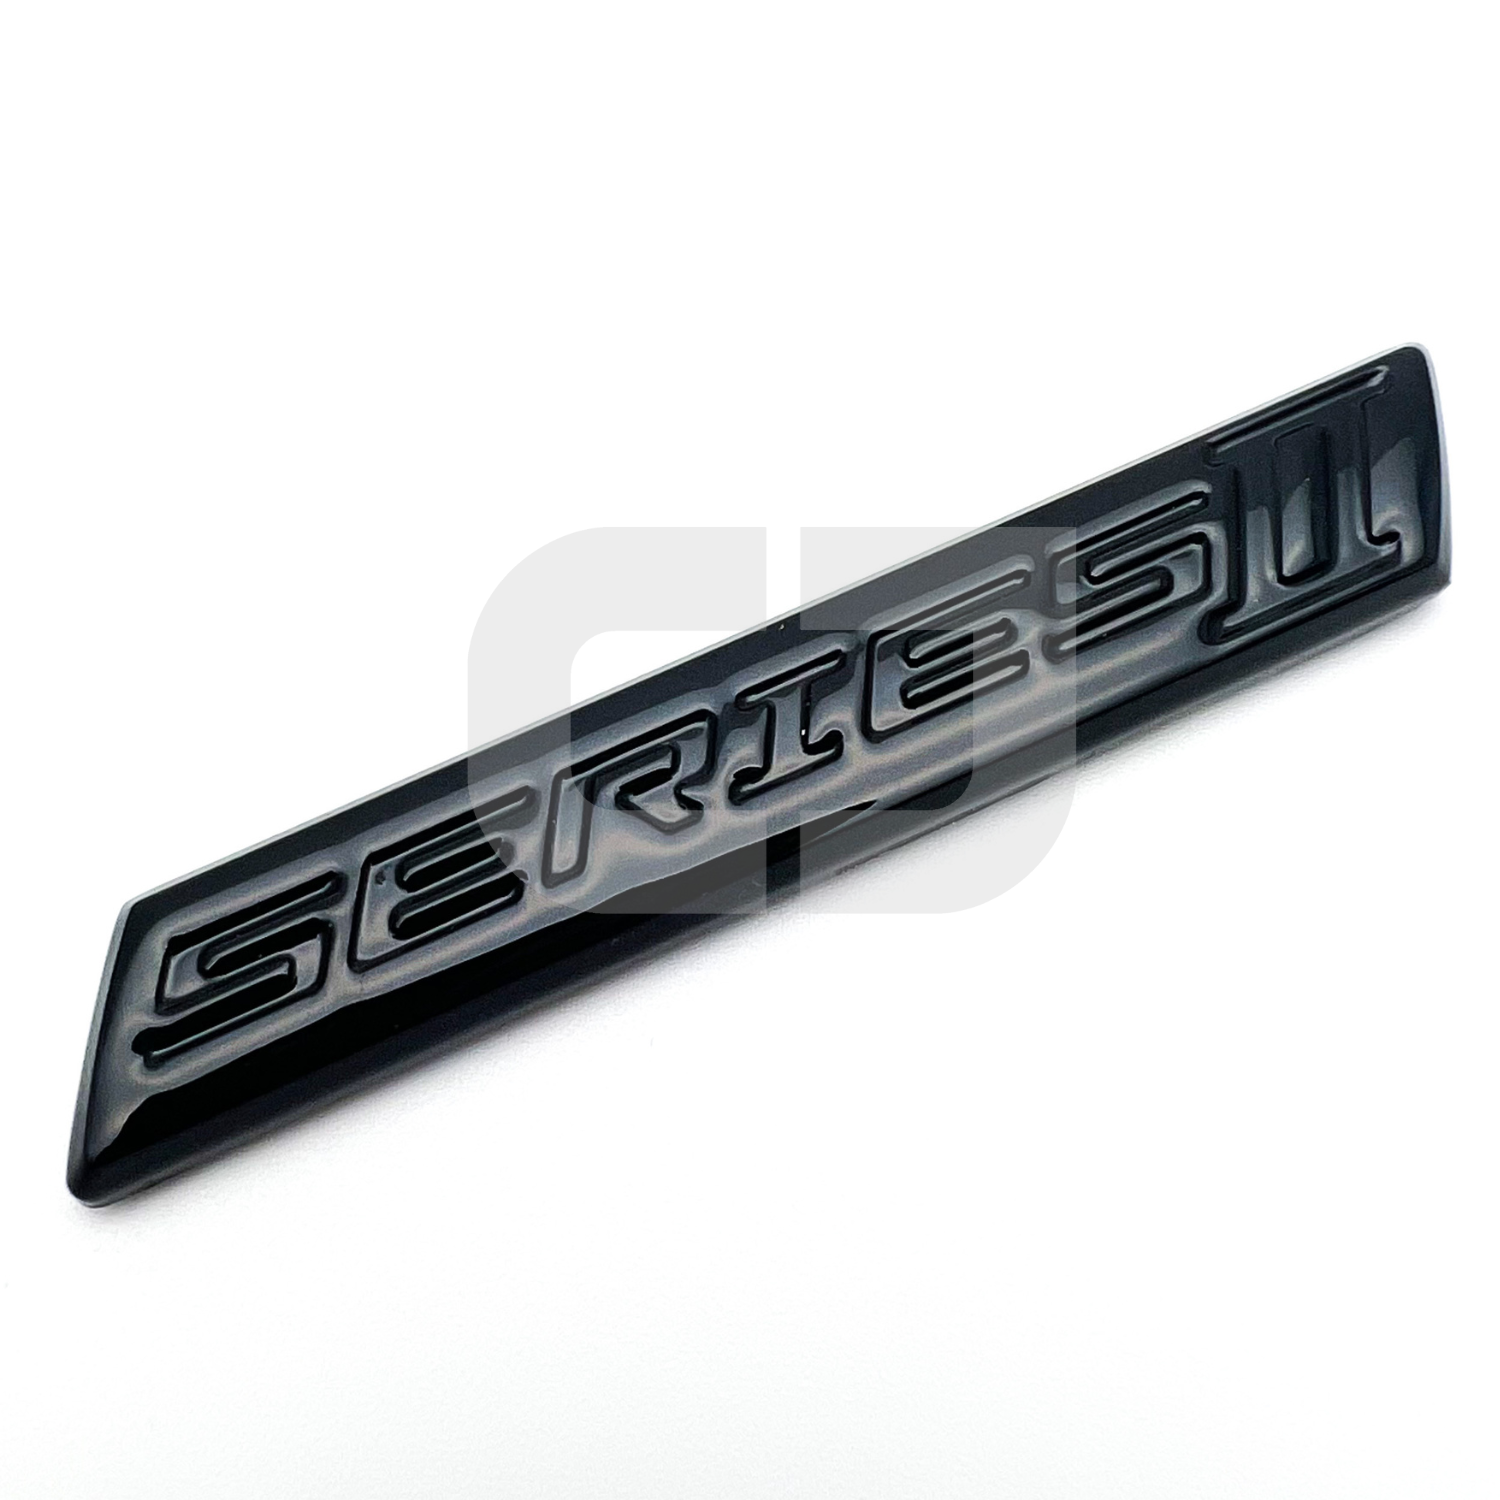 Holden Gloss Black Series 2 Series II Badge Fits VF Commodore